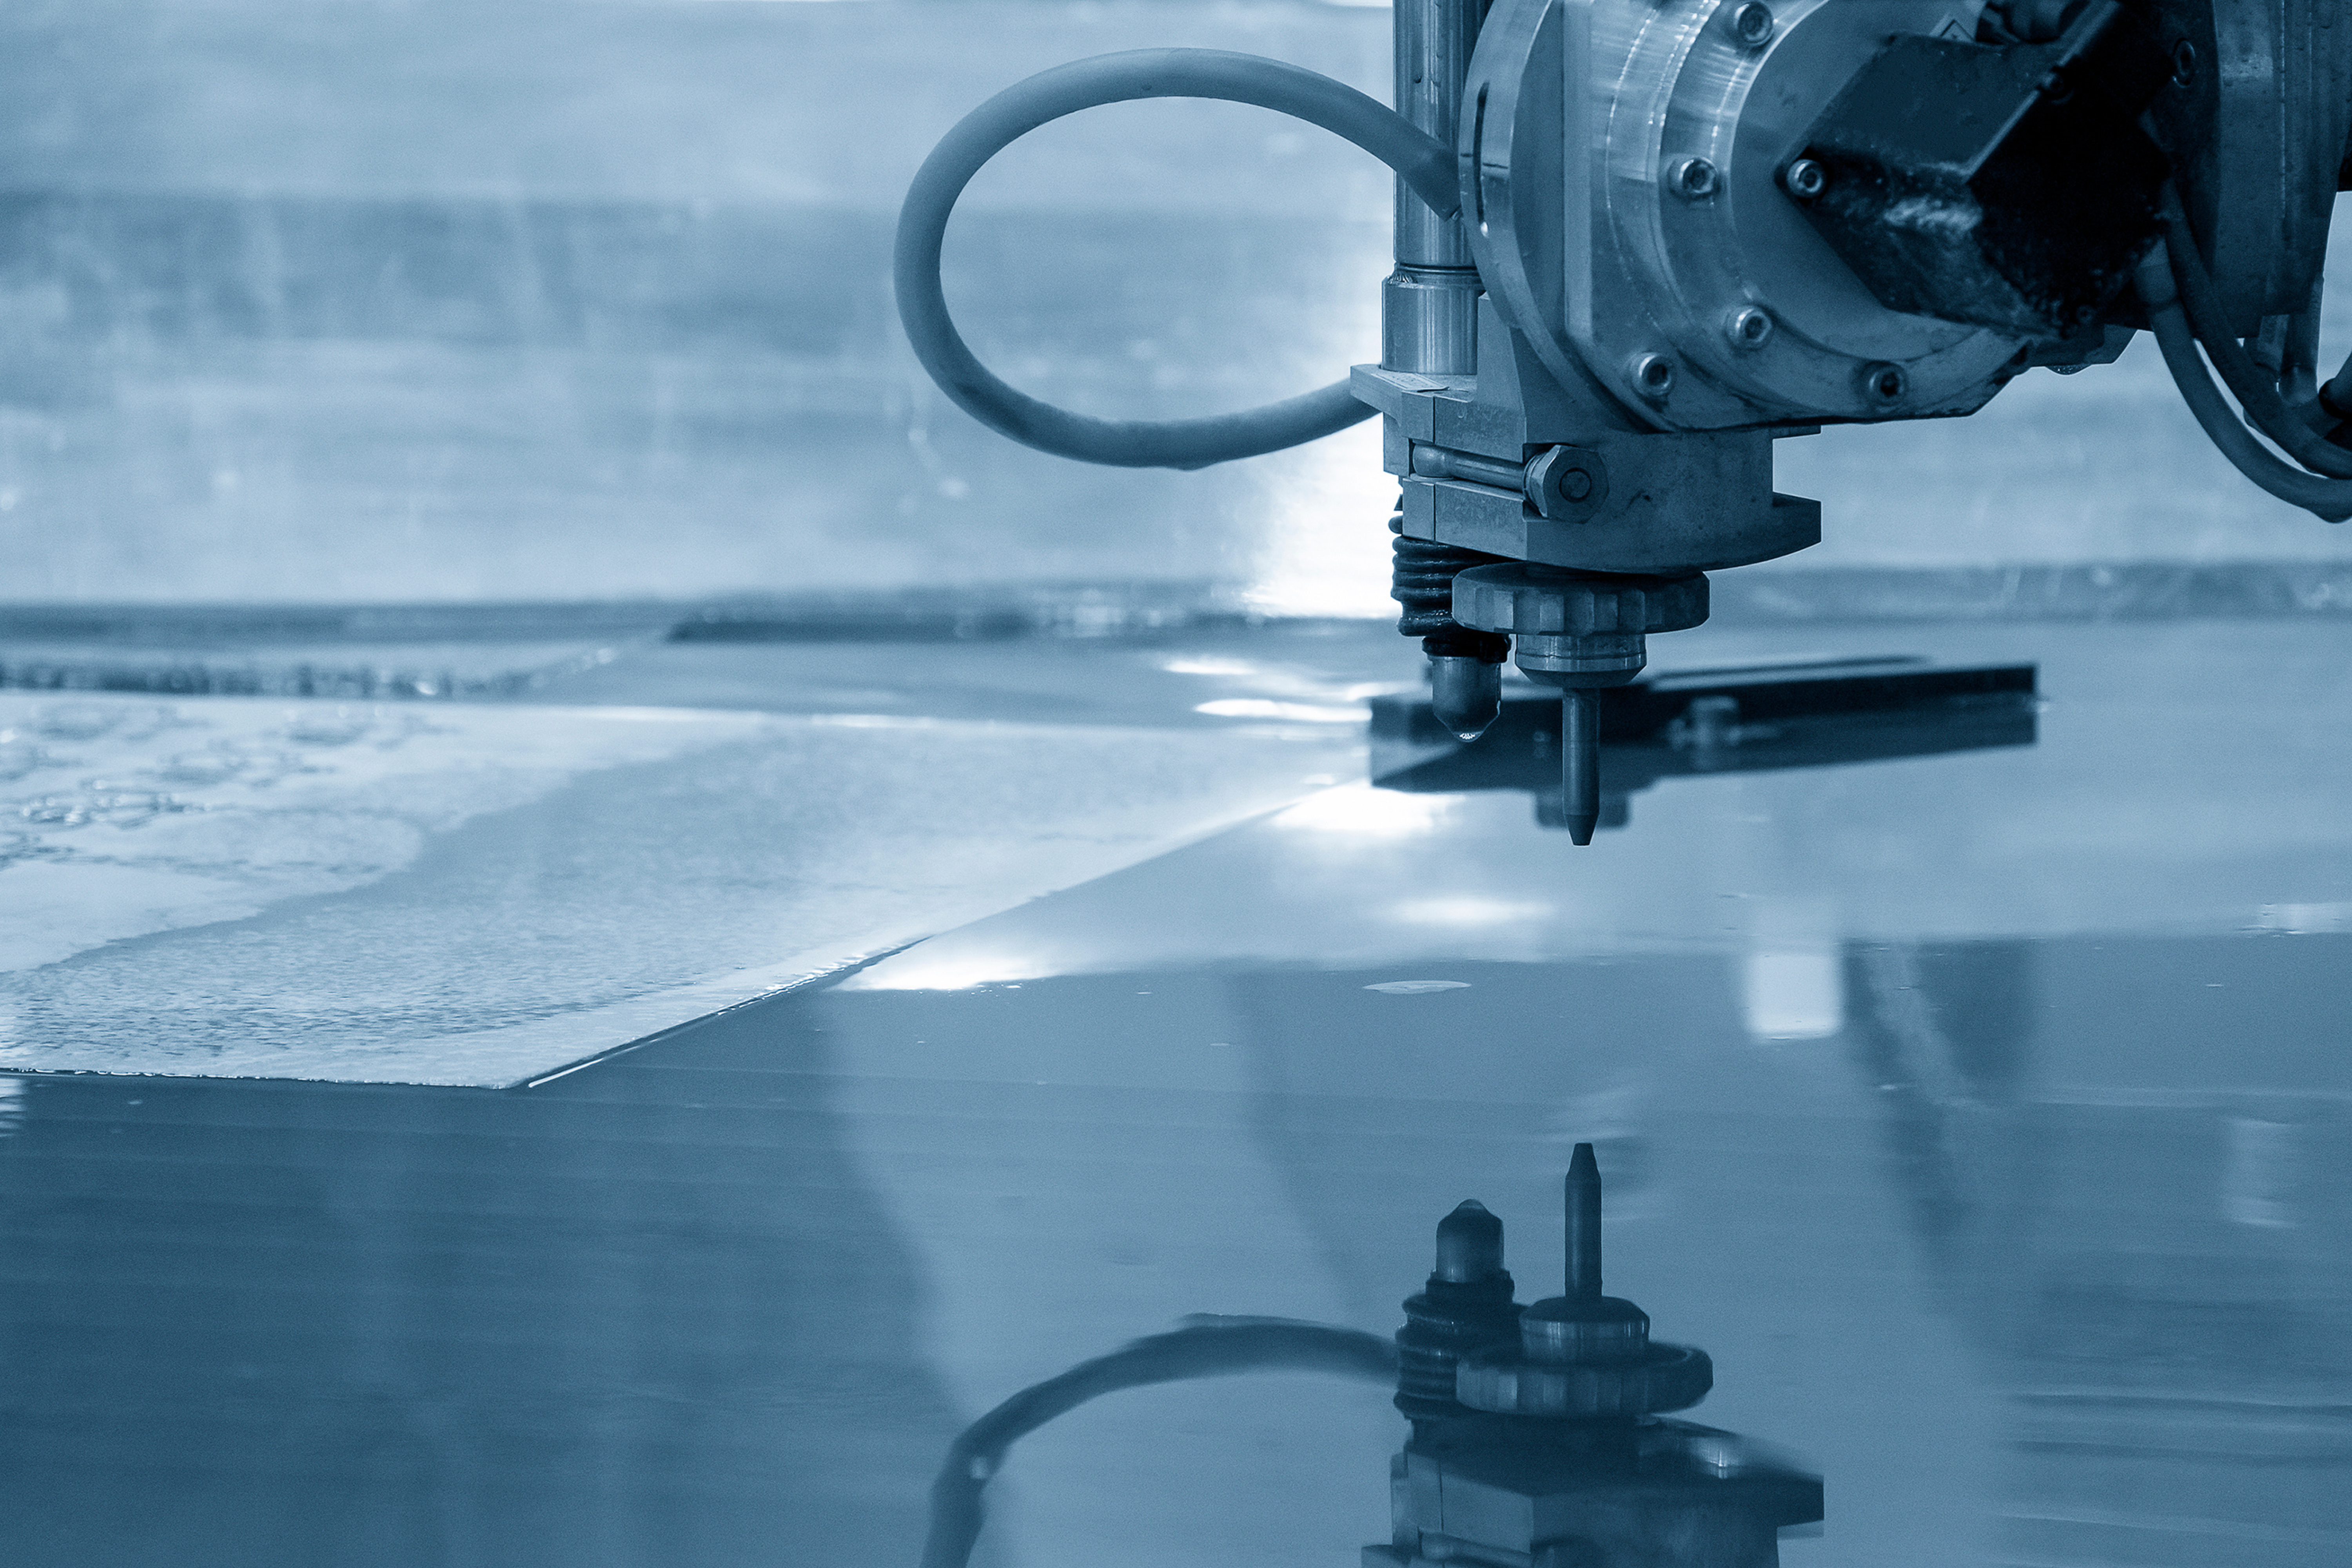 Adapting to Complexity SchGo’s Waterjet & Laser Cutting for Uneven Thicknesses